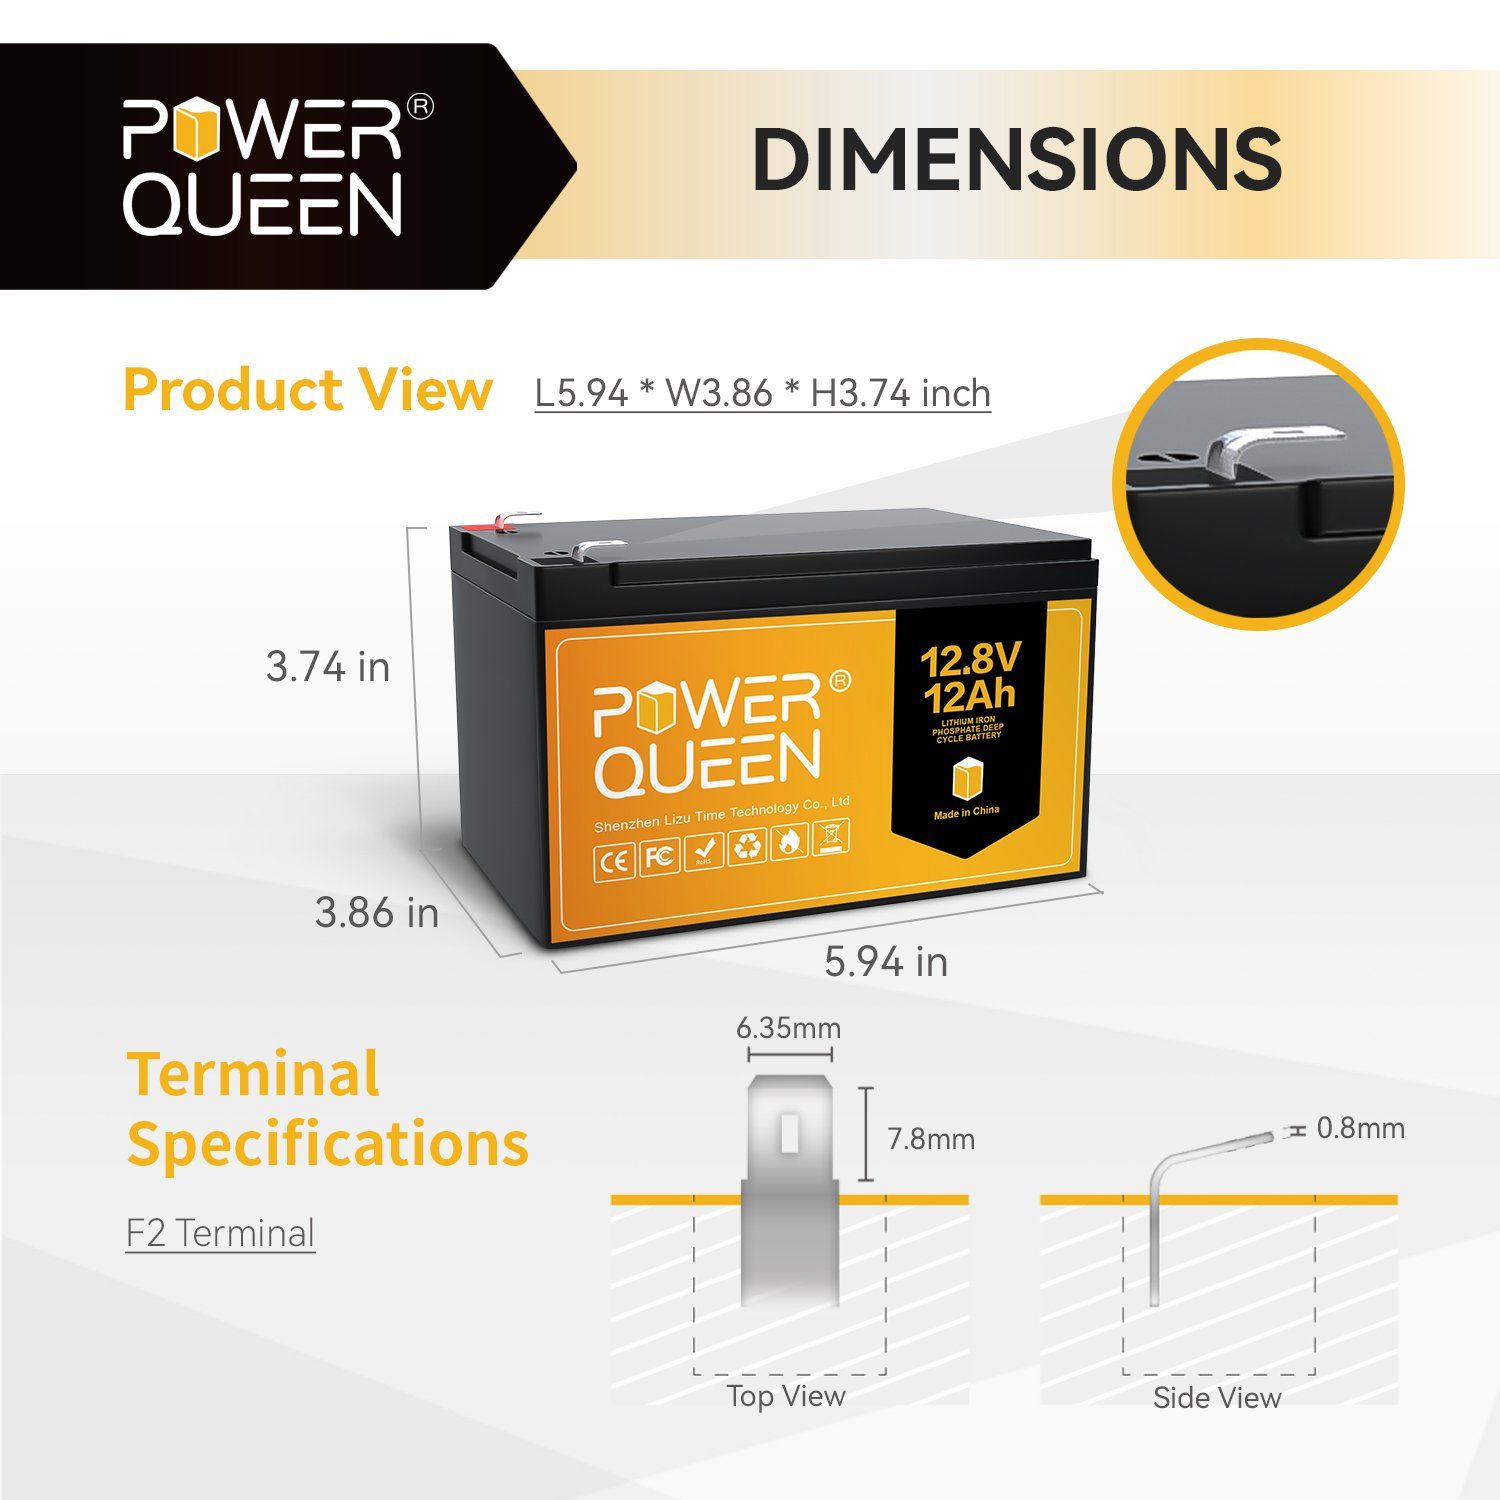 12.8V 12Ah LiFePO4 Battery, Built-IN 12A BMS Power Queen